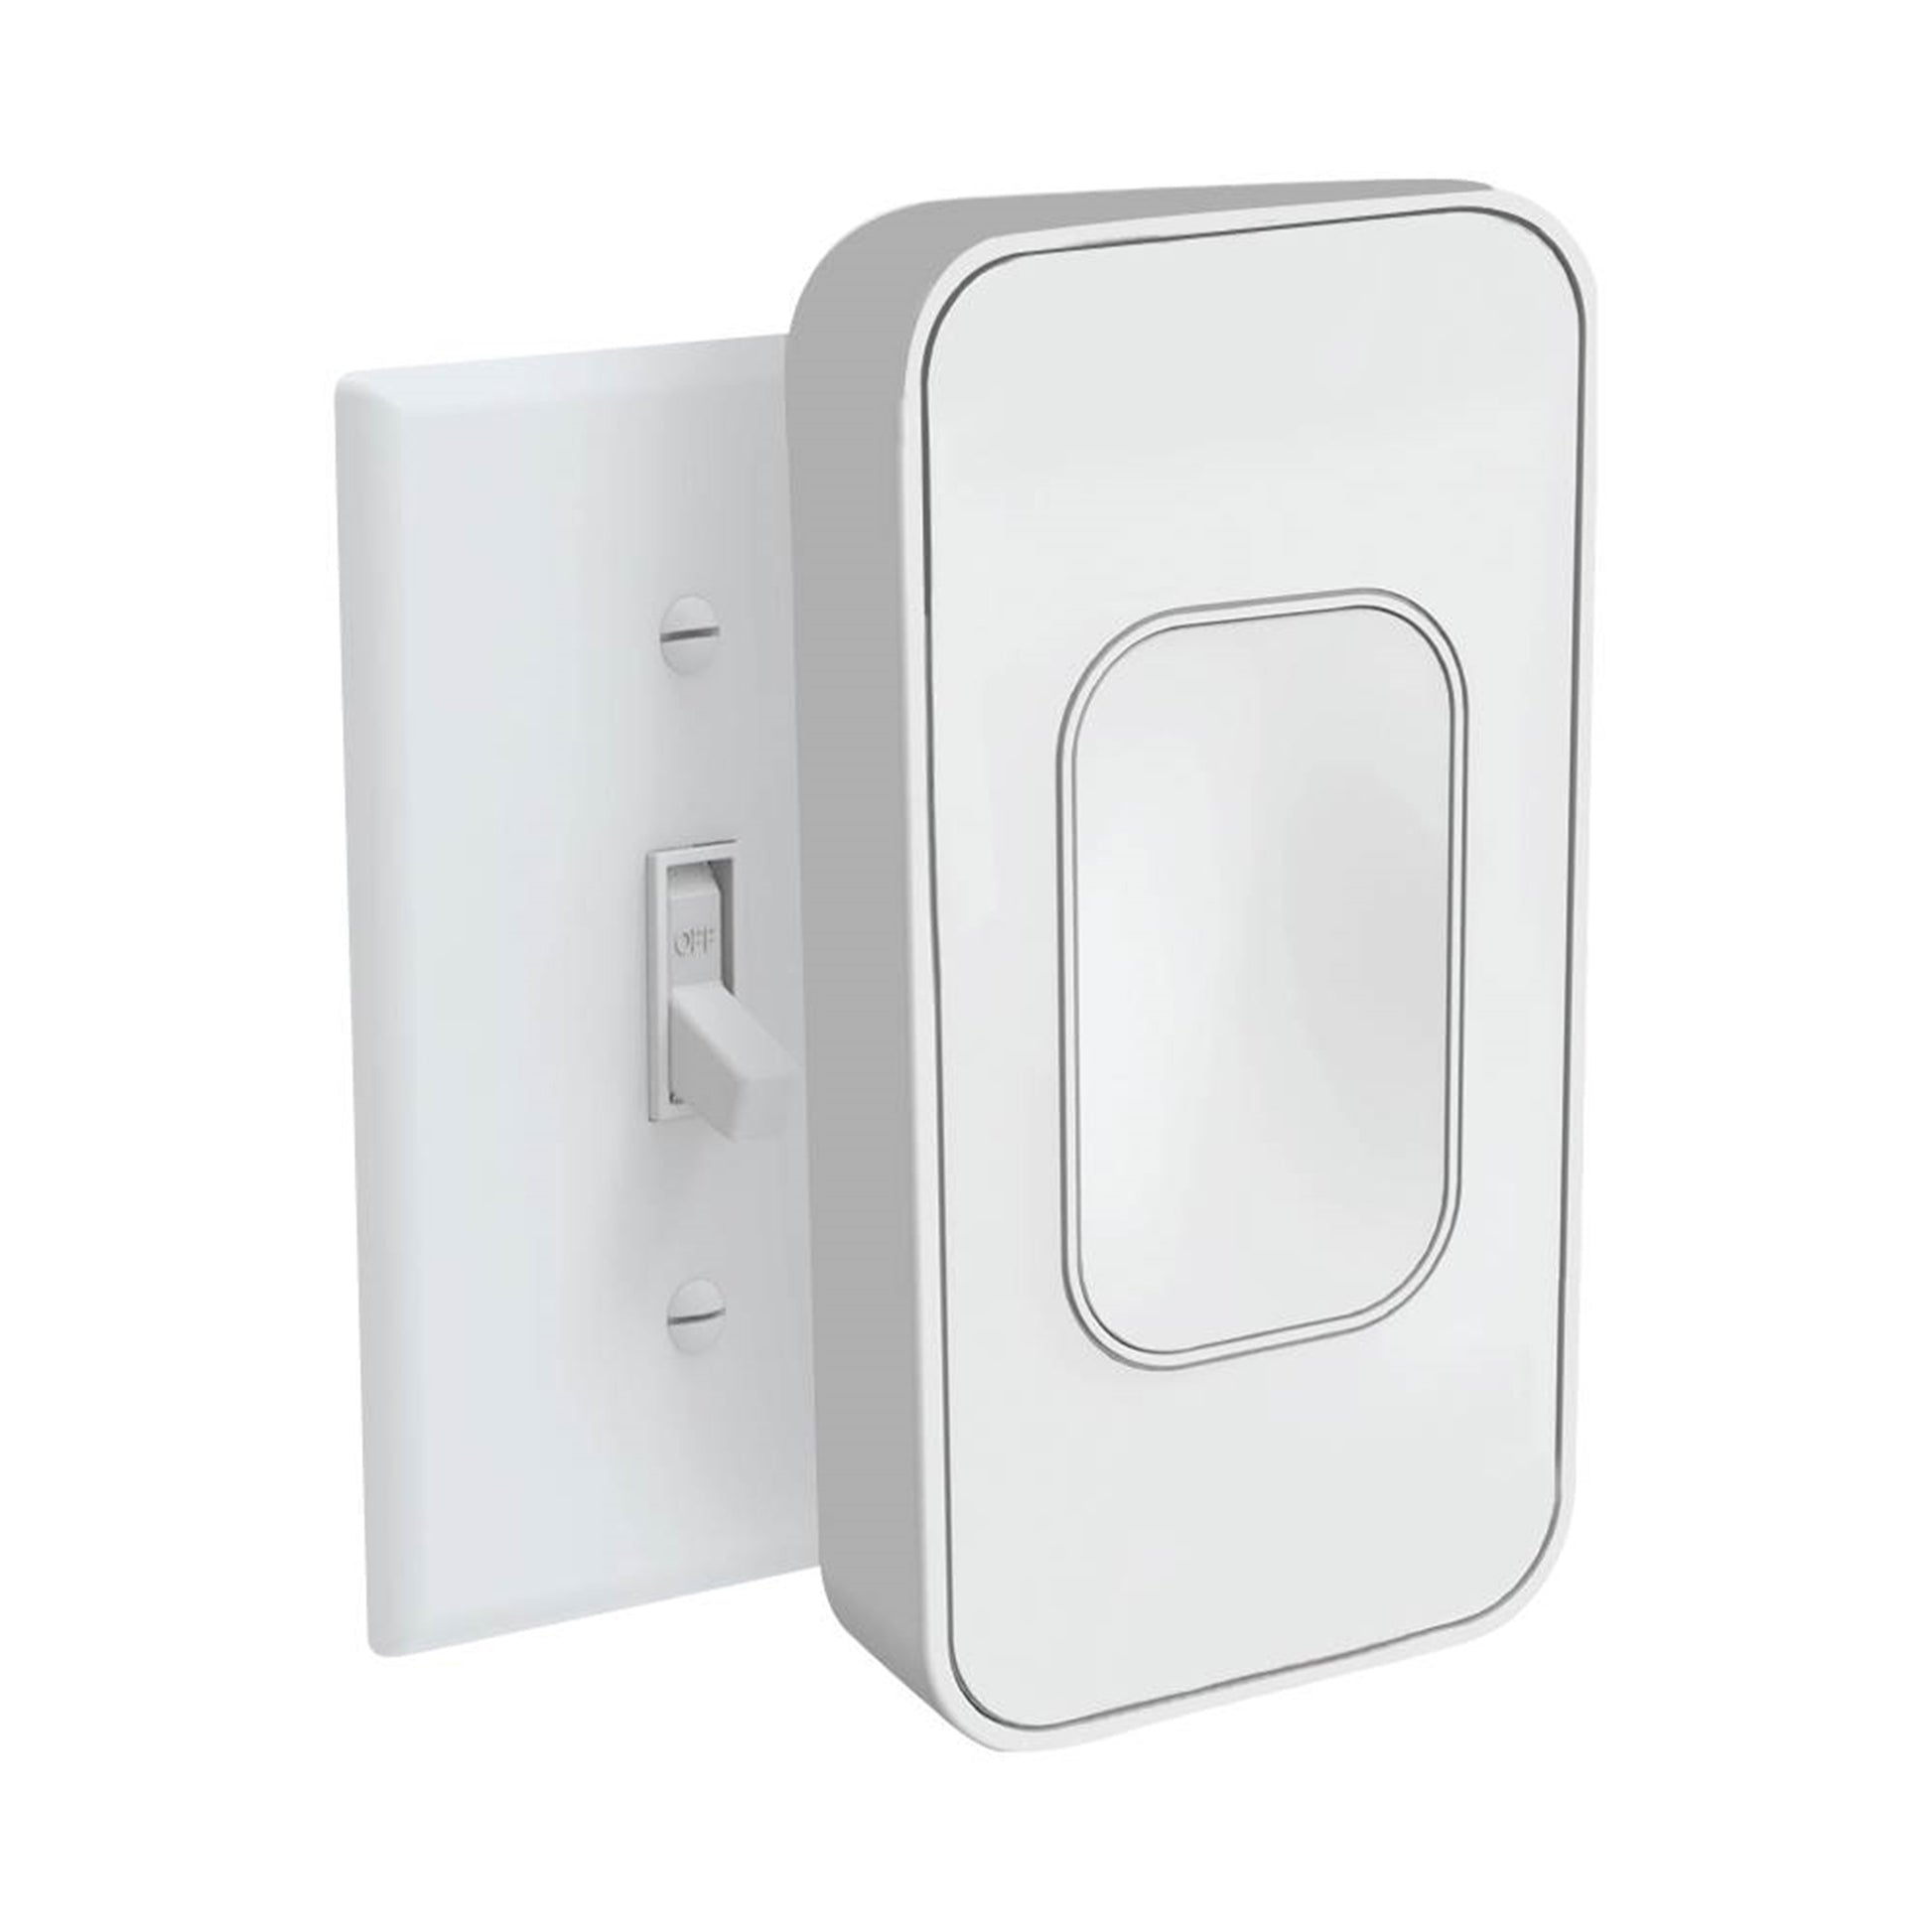 SimplySmartHome by Switchmate Smart Light Switch 2.0 for Toggle Style Light Switches - Warehouse B